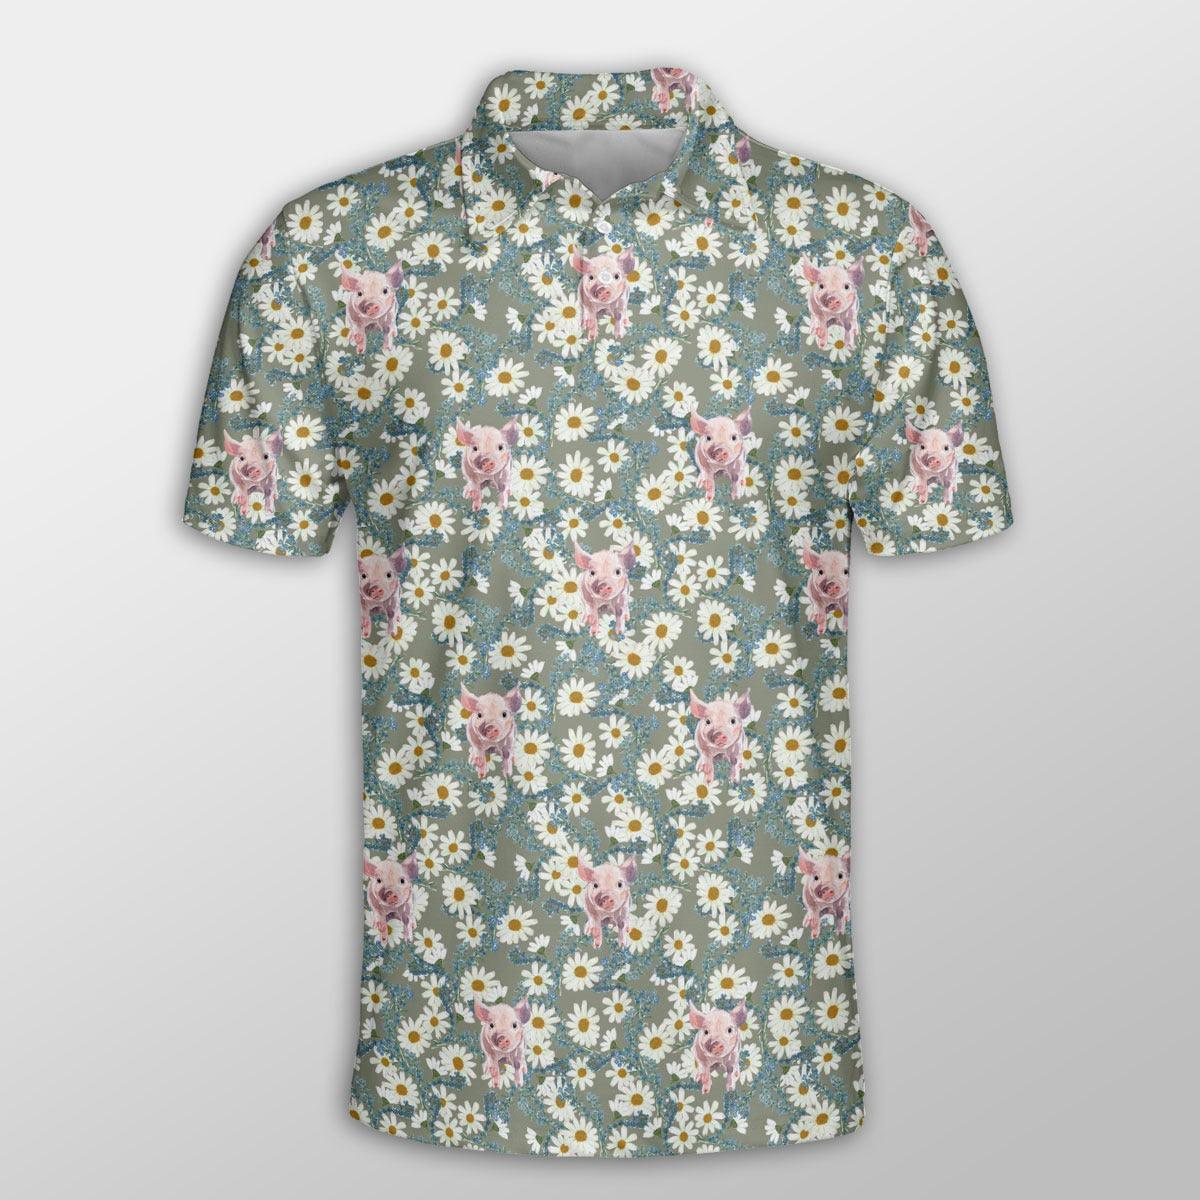 Pig Men Polo Shirt For Summer - Pig Camomilles Flower Grey Pattern Button Shirt For Men - Perfect Gift For Pig Lovers, Cattle Lovers - Amzanimalsgift